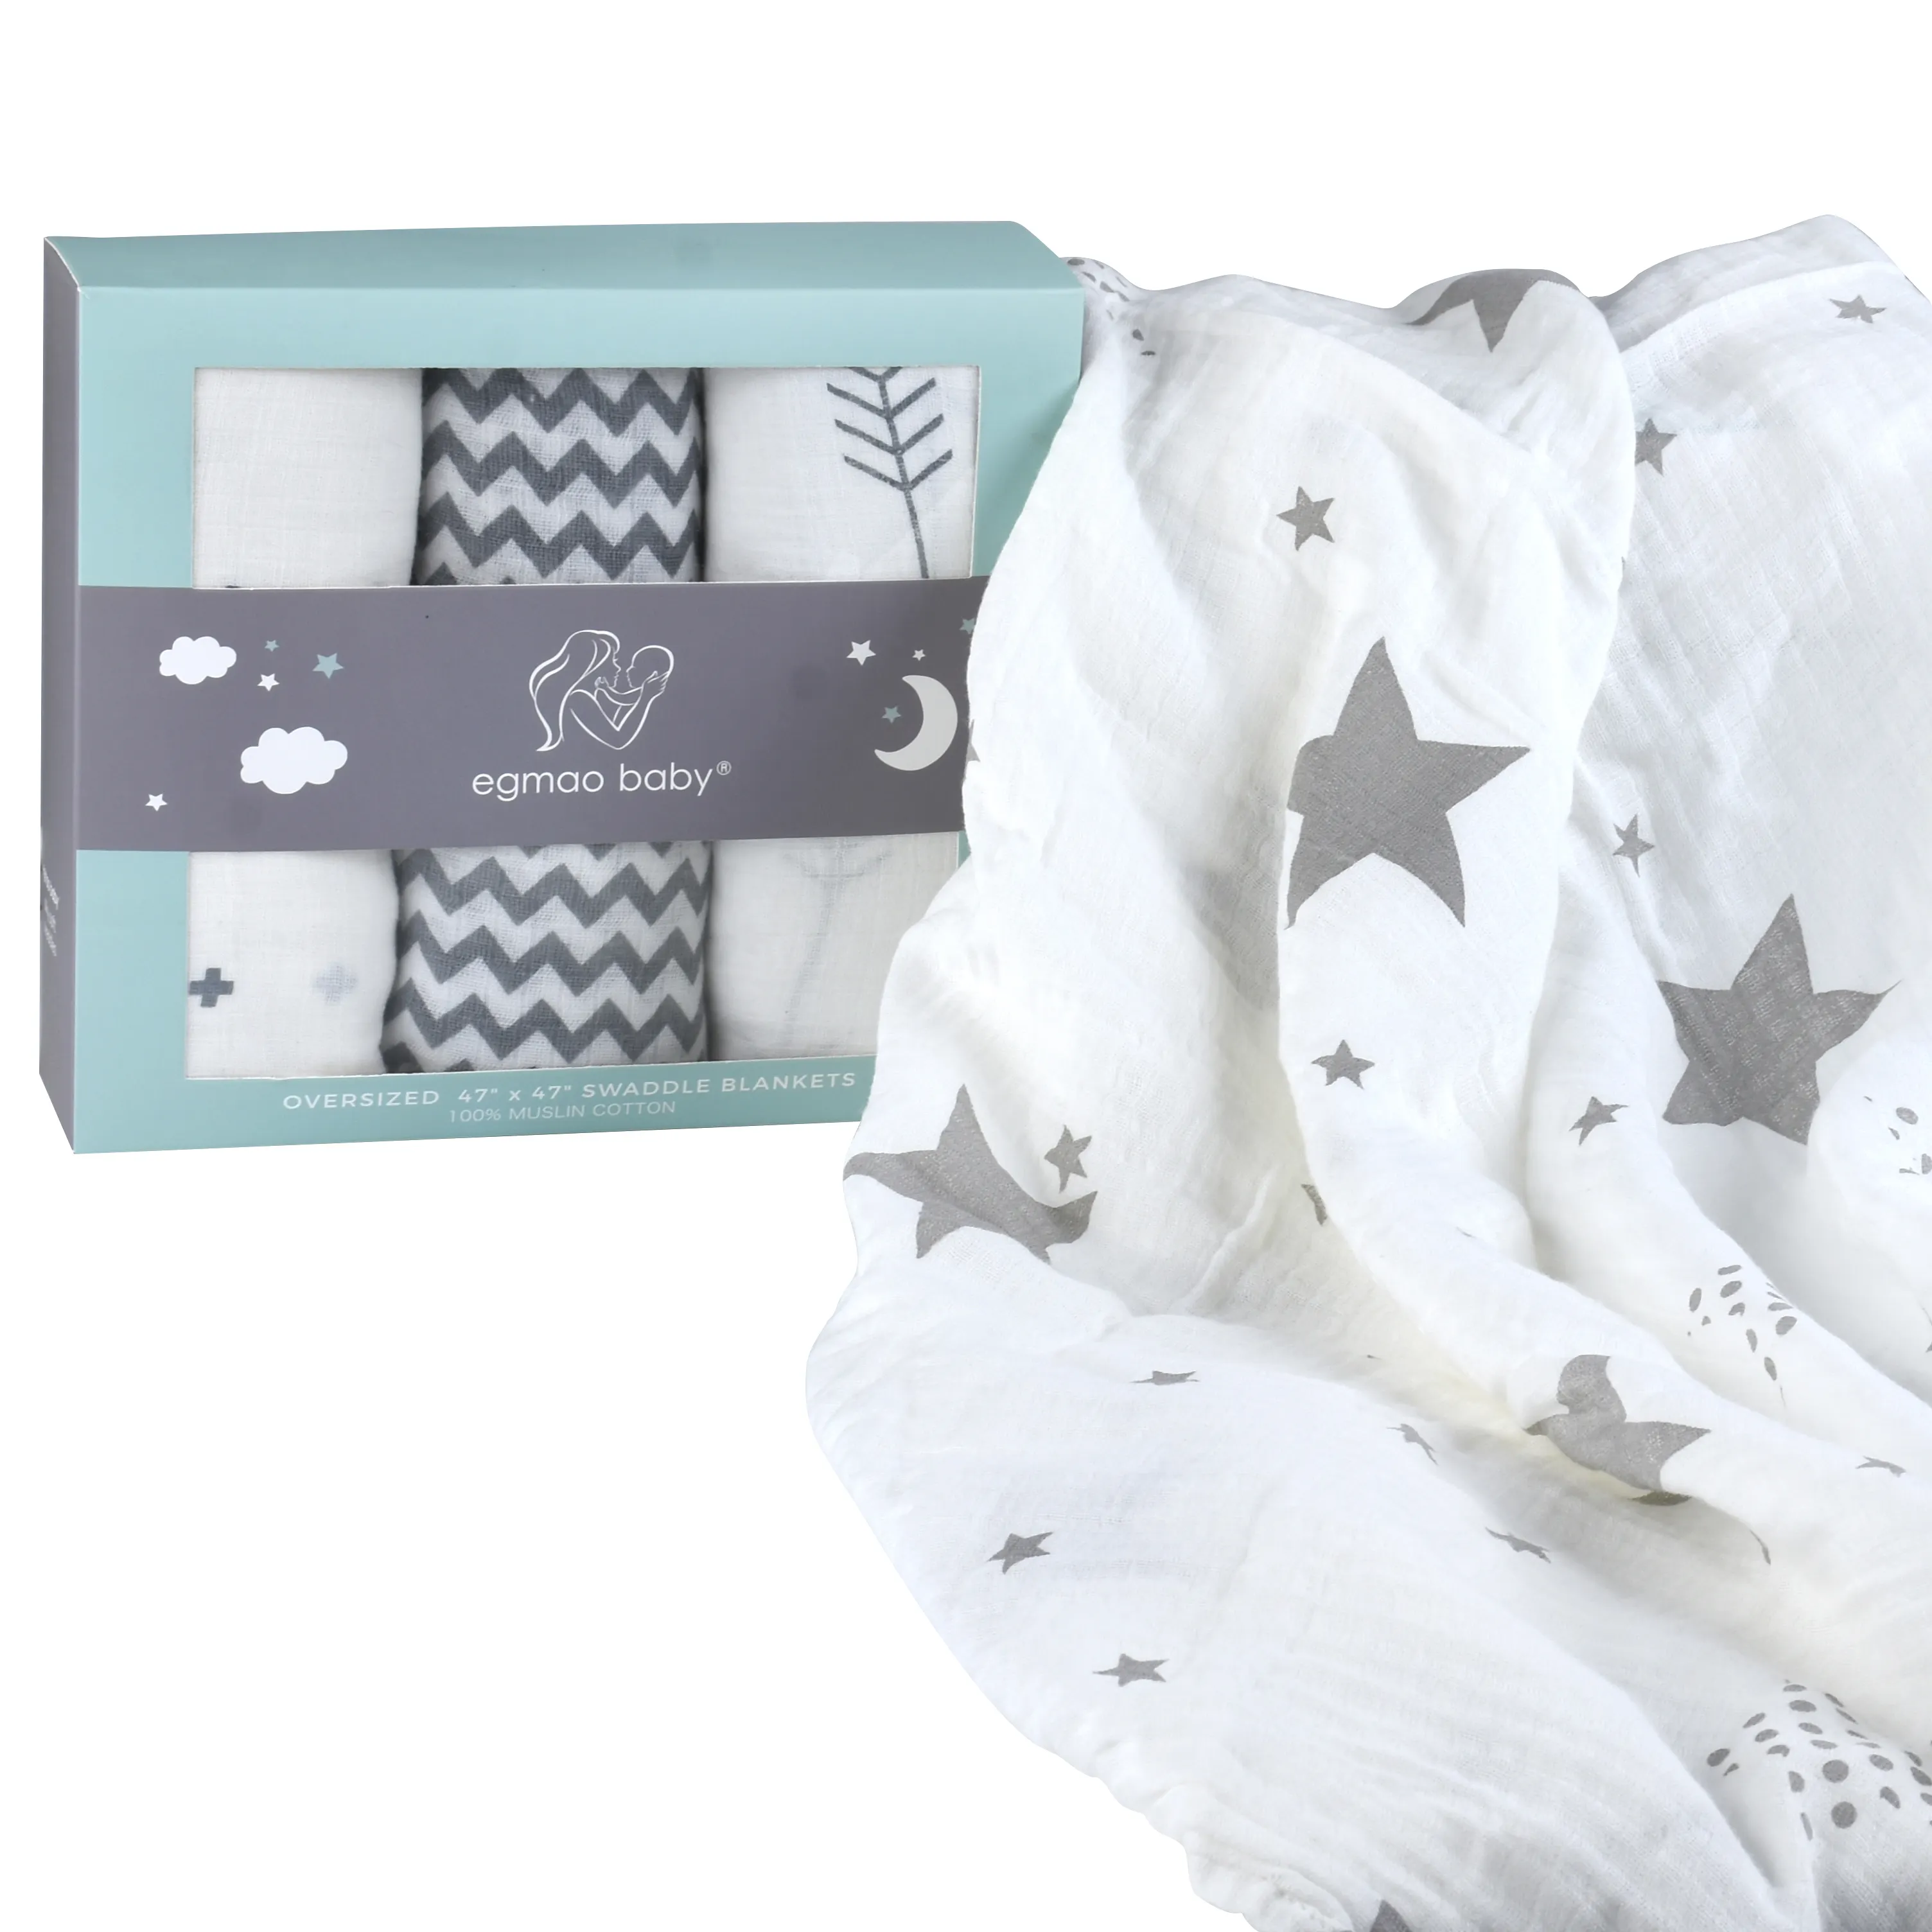 High Quality Baby Swaddle Wrap Muslin Baby Swadlle Blanket Receiving Blanket Best Shower Gift